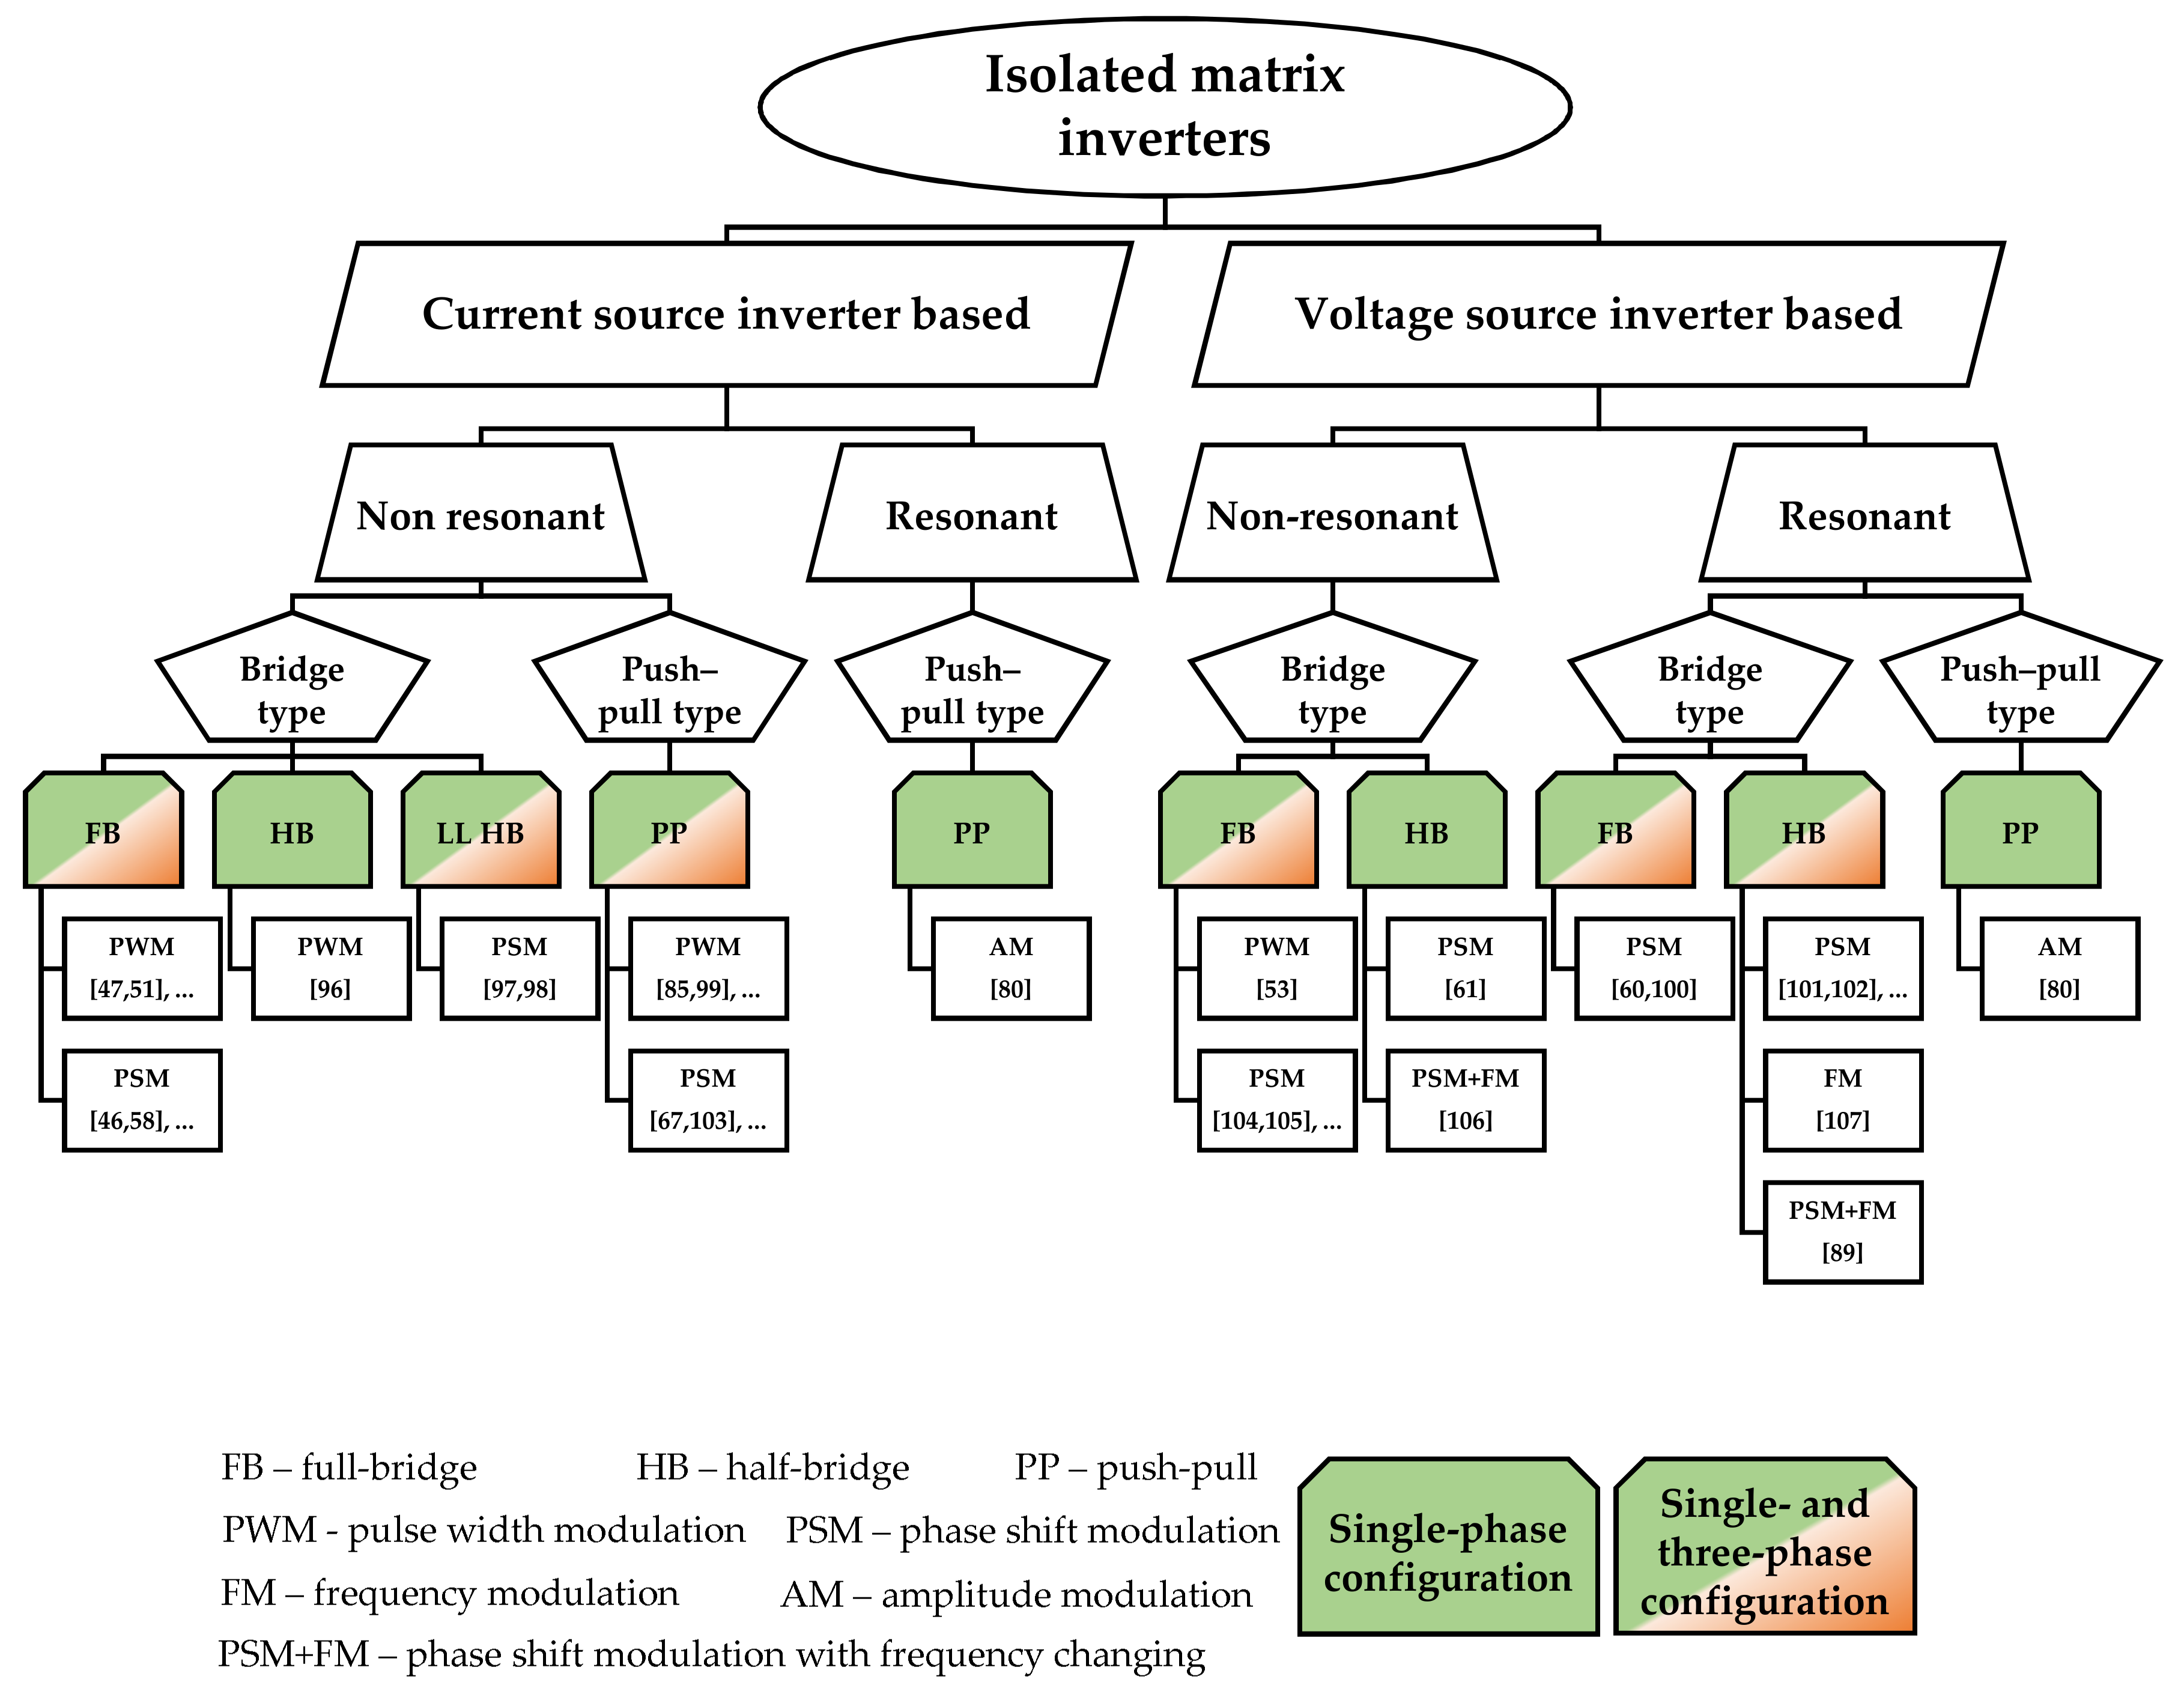 Energies | Free Full-Text | Review of Isolated Matrix Inverters:  Topologies, Modulation Methods and Applications | HTML